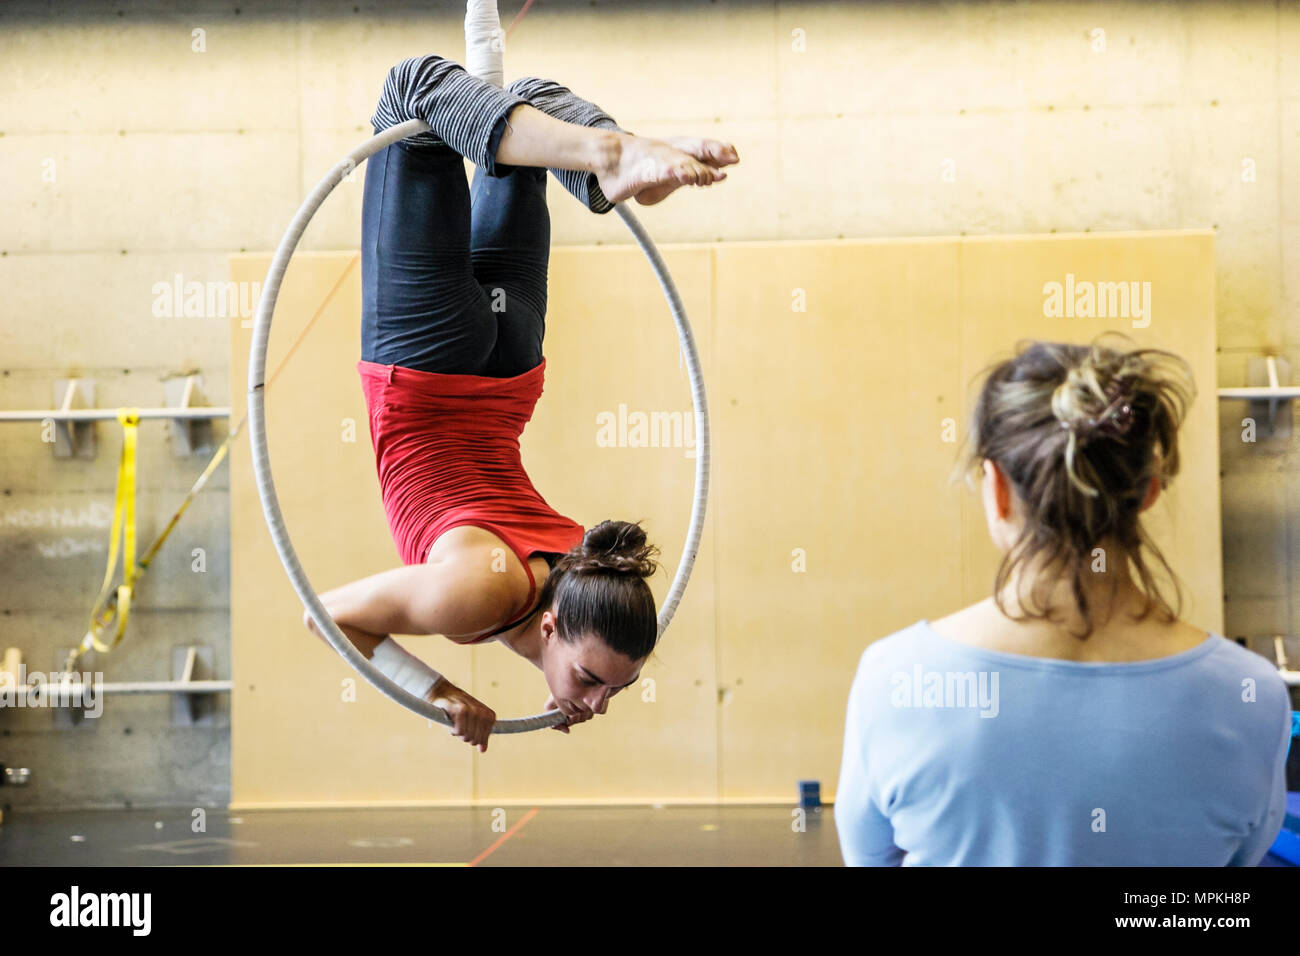 Montreal Canada,Quebec Province,National Circus School,campus,gymnastics,gymnast,practice,rehearsal,acrobatic skills,student students instructor,ring, Stock Photo